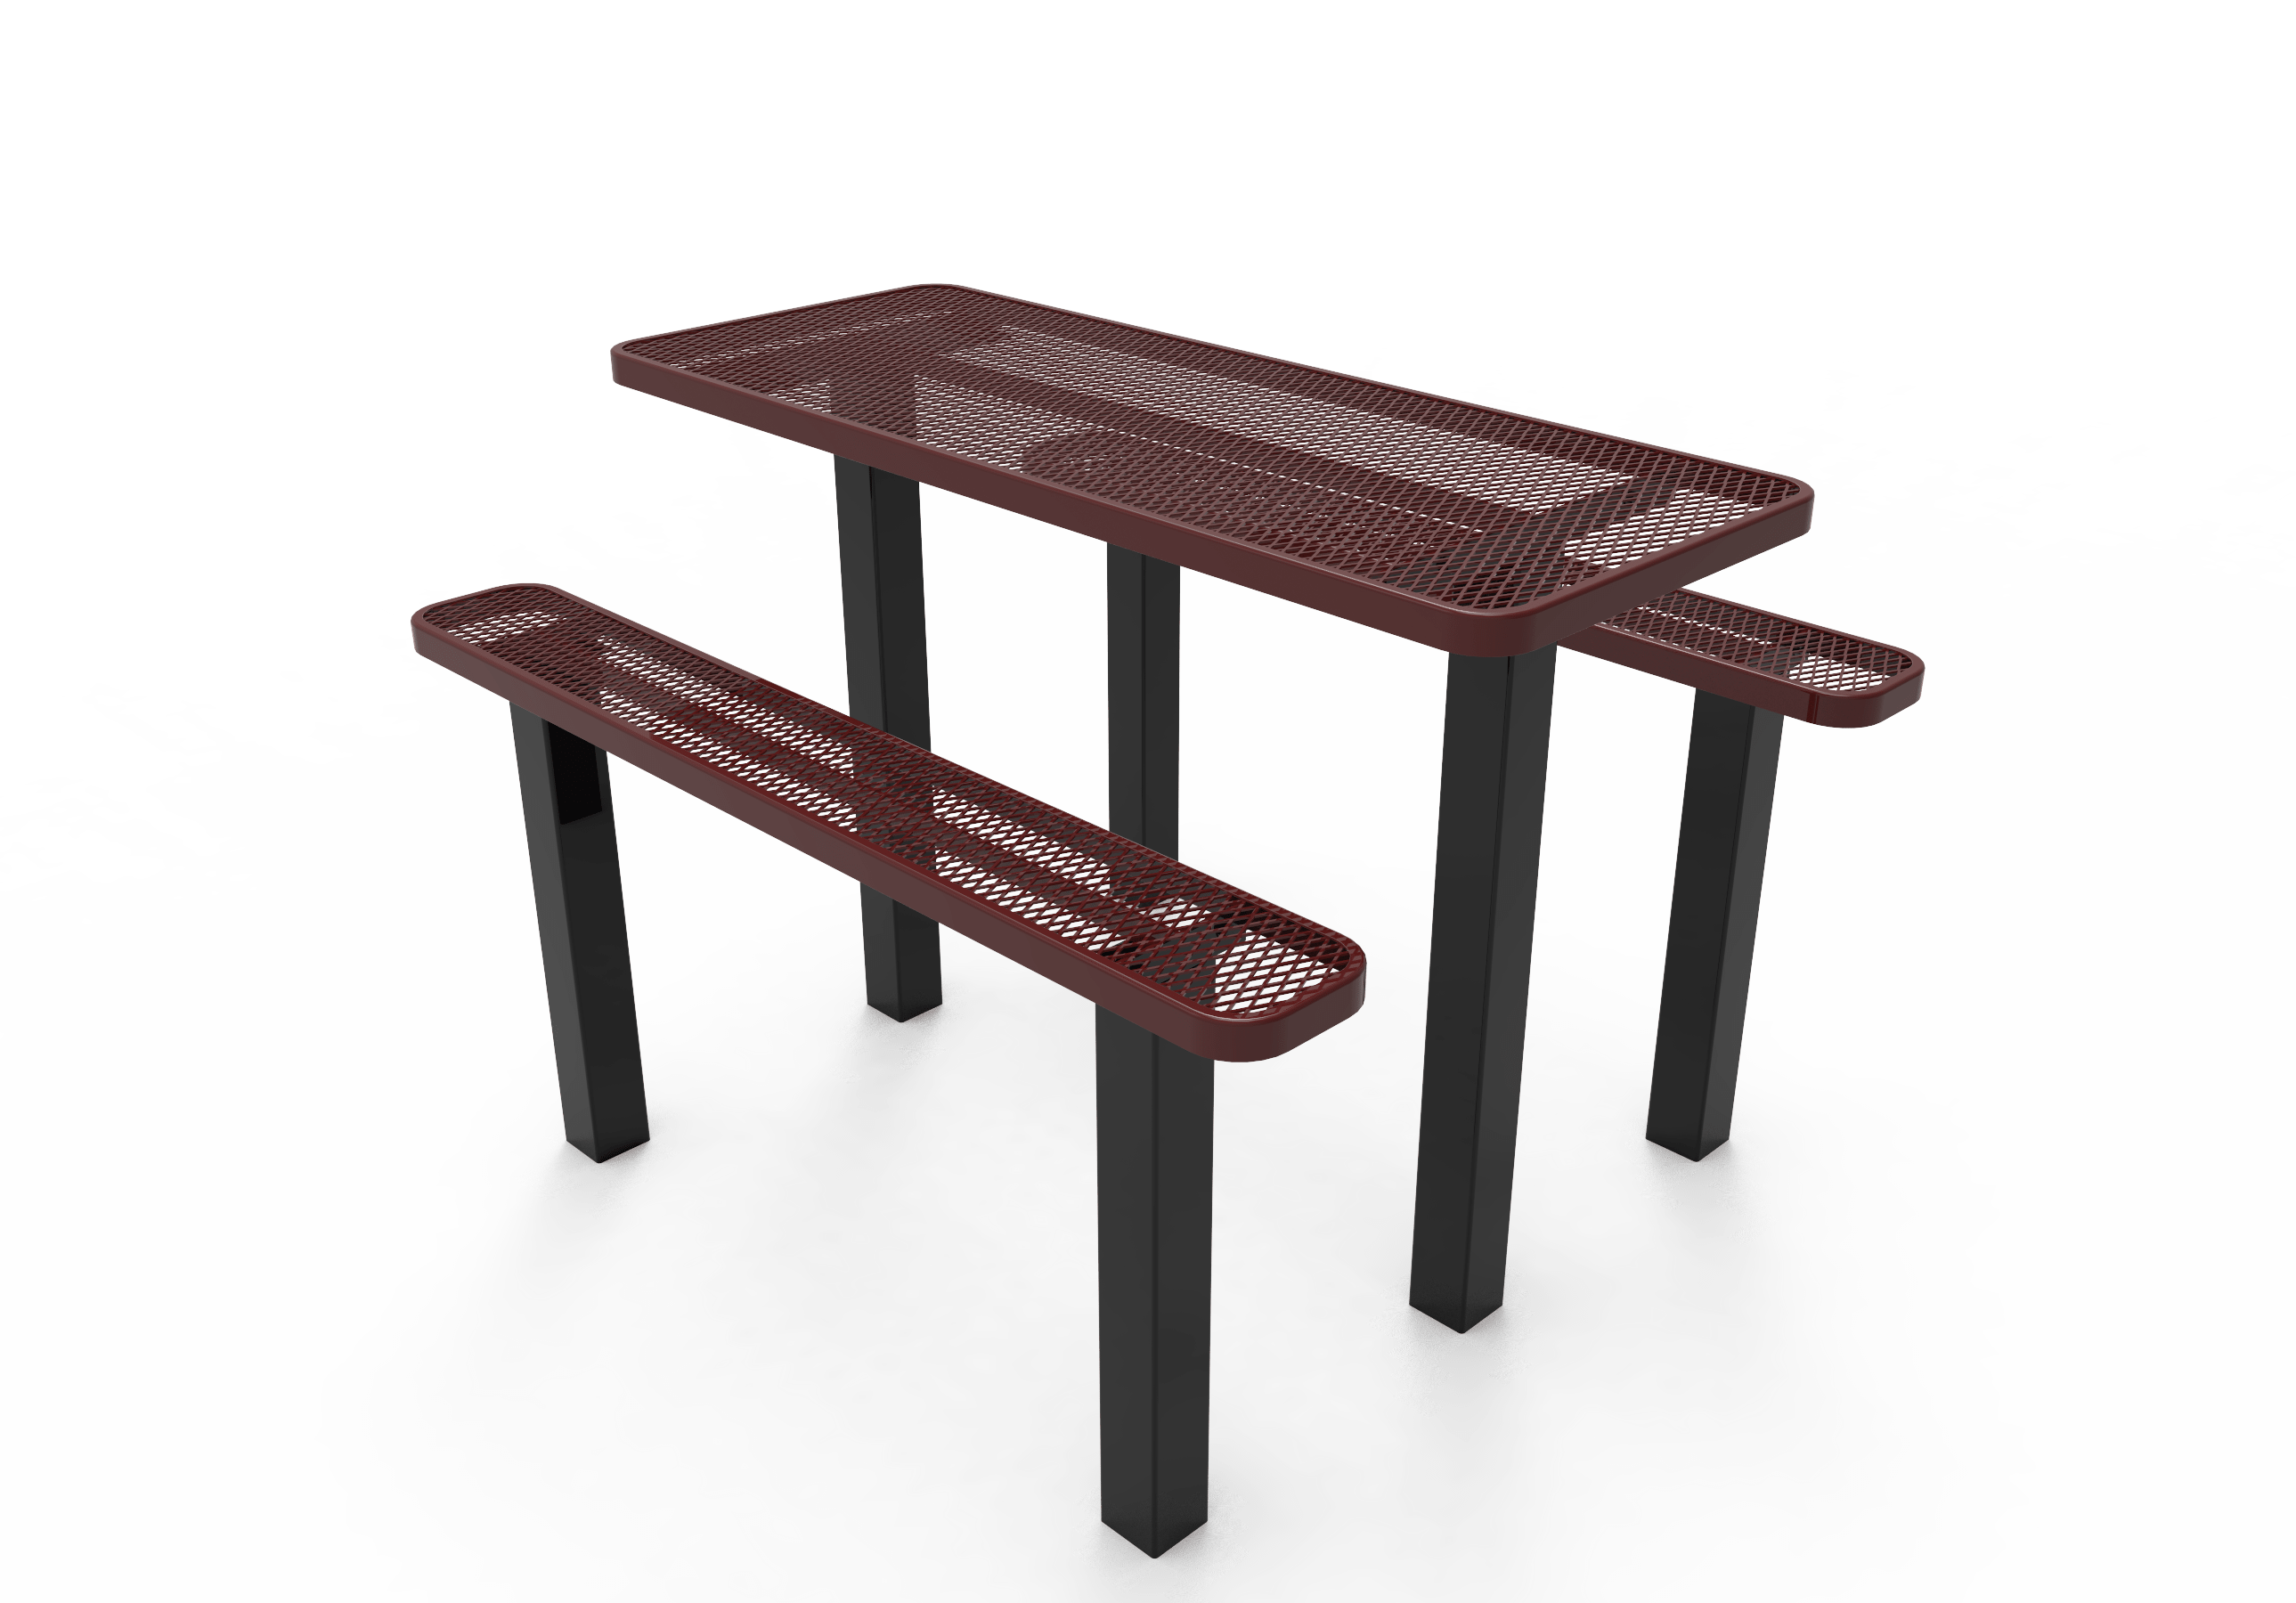 6′ Independent In Ground Table -Mesh
TRT06-C-10-000
Industry Standard Finish
$1249.00
TRT06-A-10-000
Advantage Premium Finish
$1549.00
